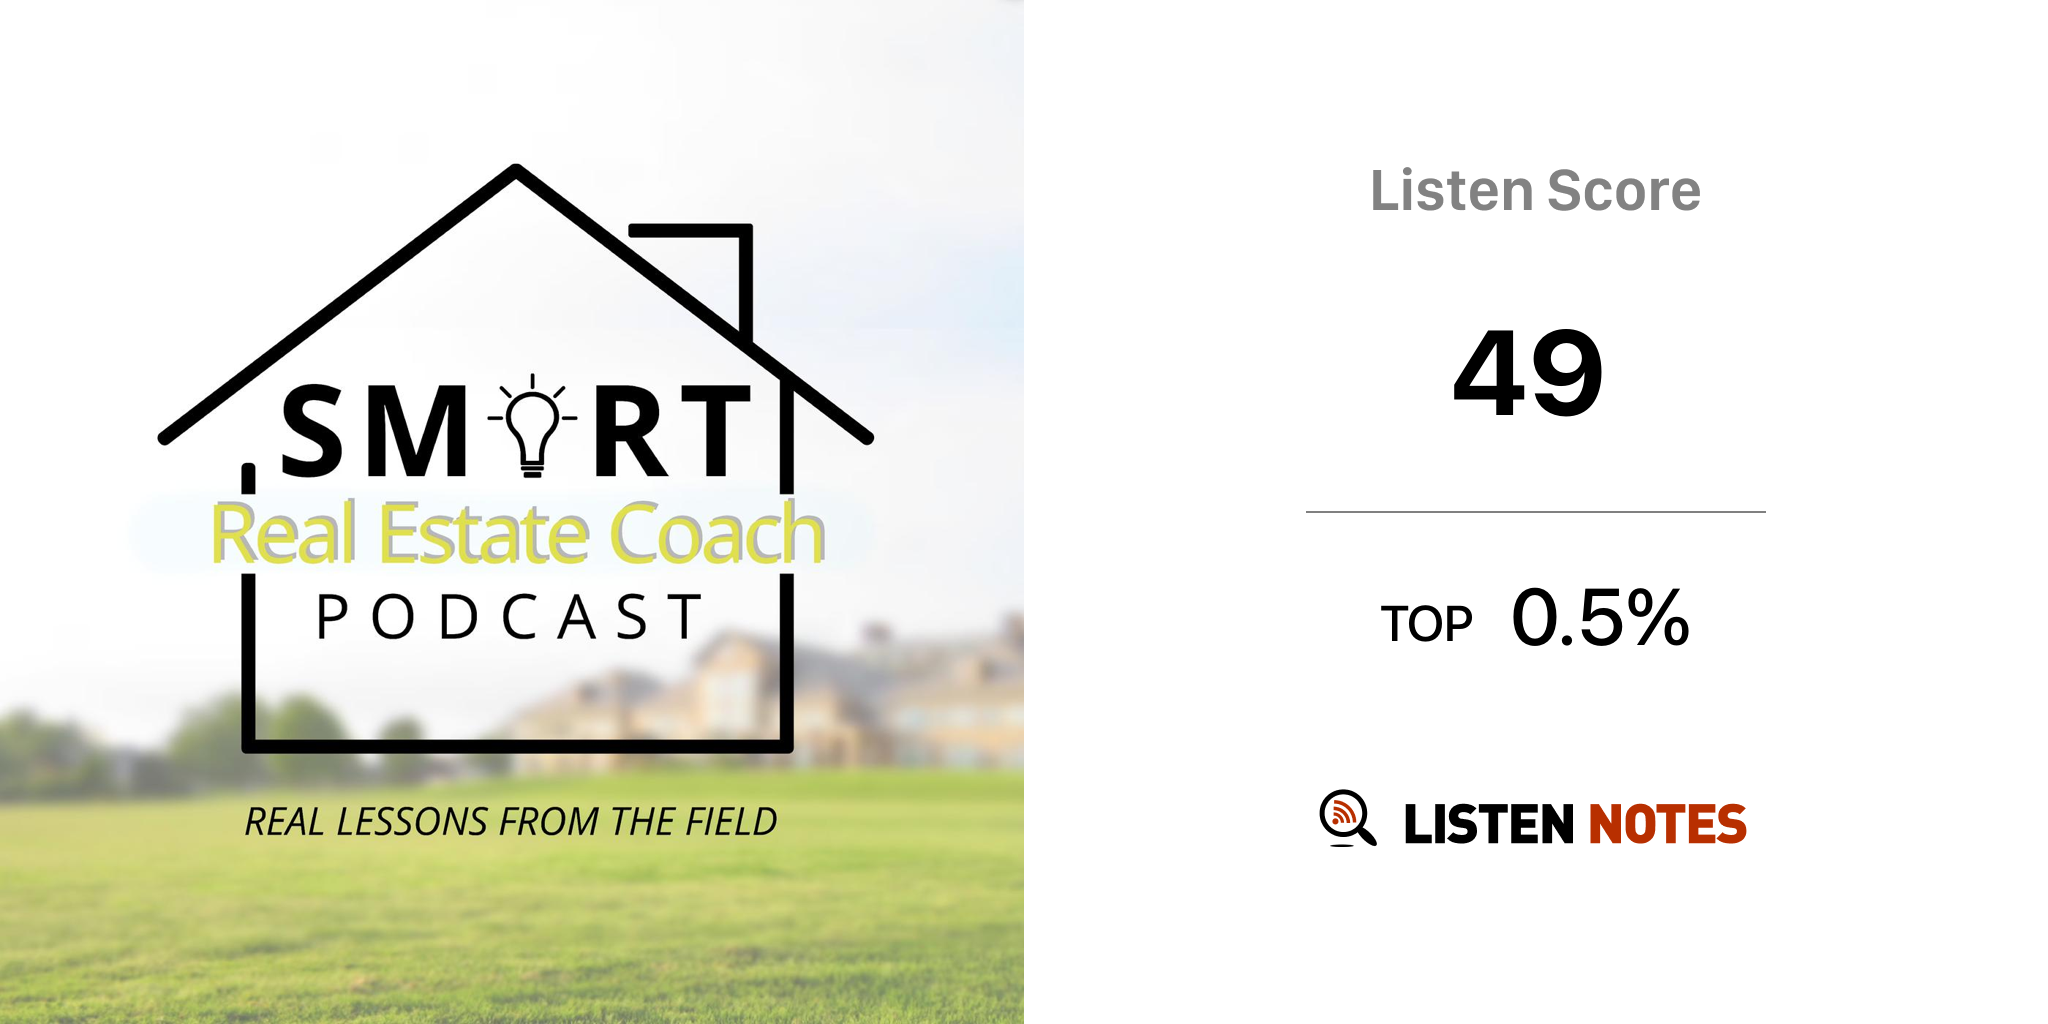 The Smart Real Estate Coach Podcast|Real Estate Investing | Listen Notes